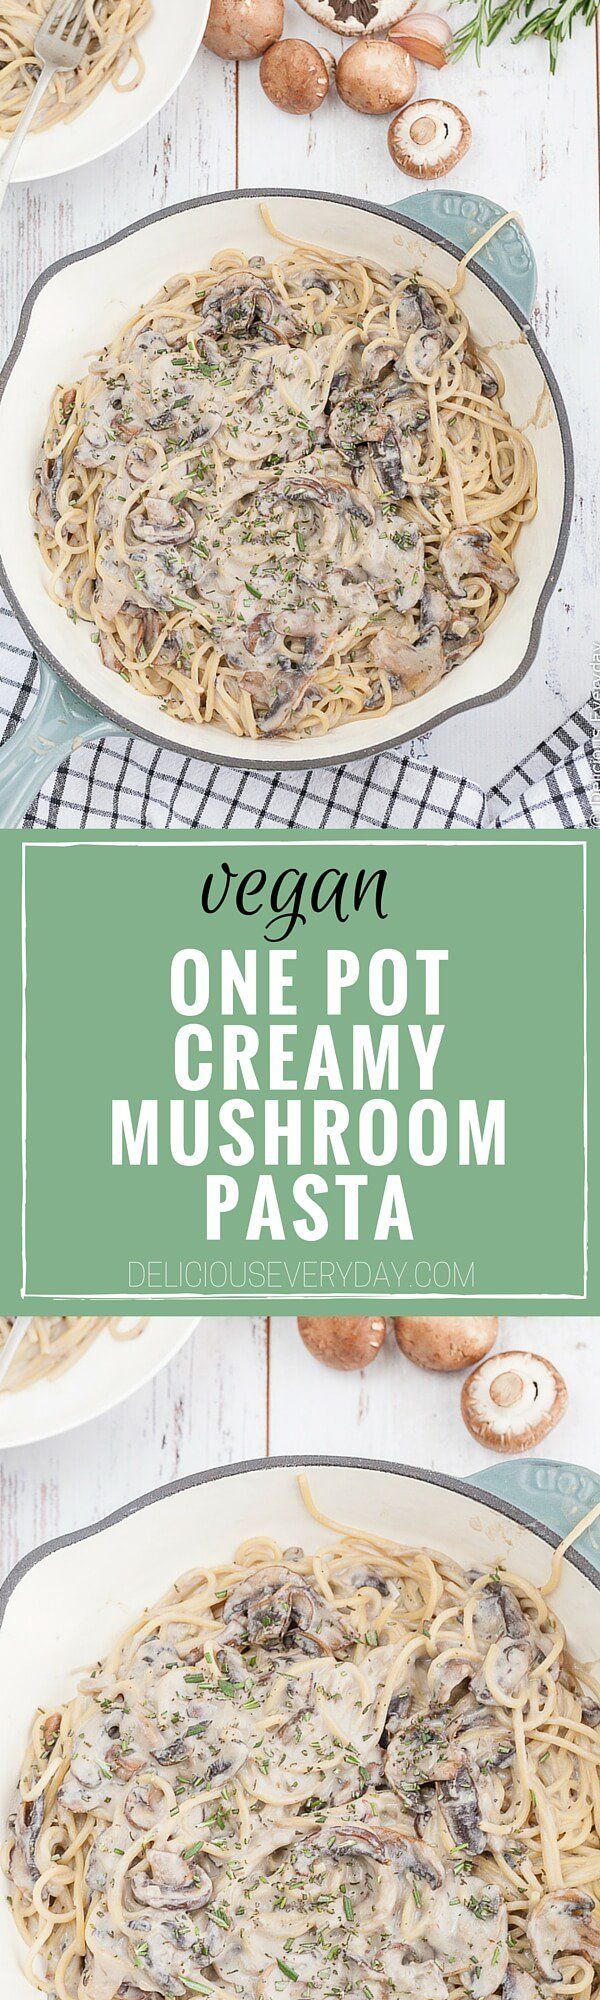 VEGAN one pot creamy mushroom pasta – All you need is 20 minutes to make this supe